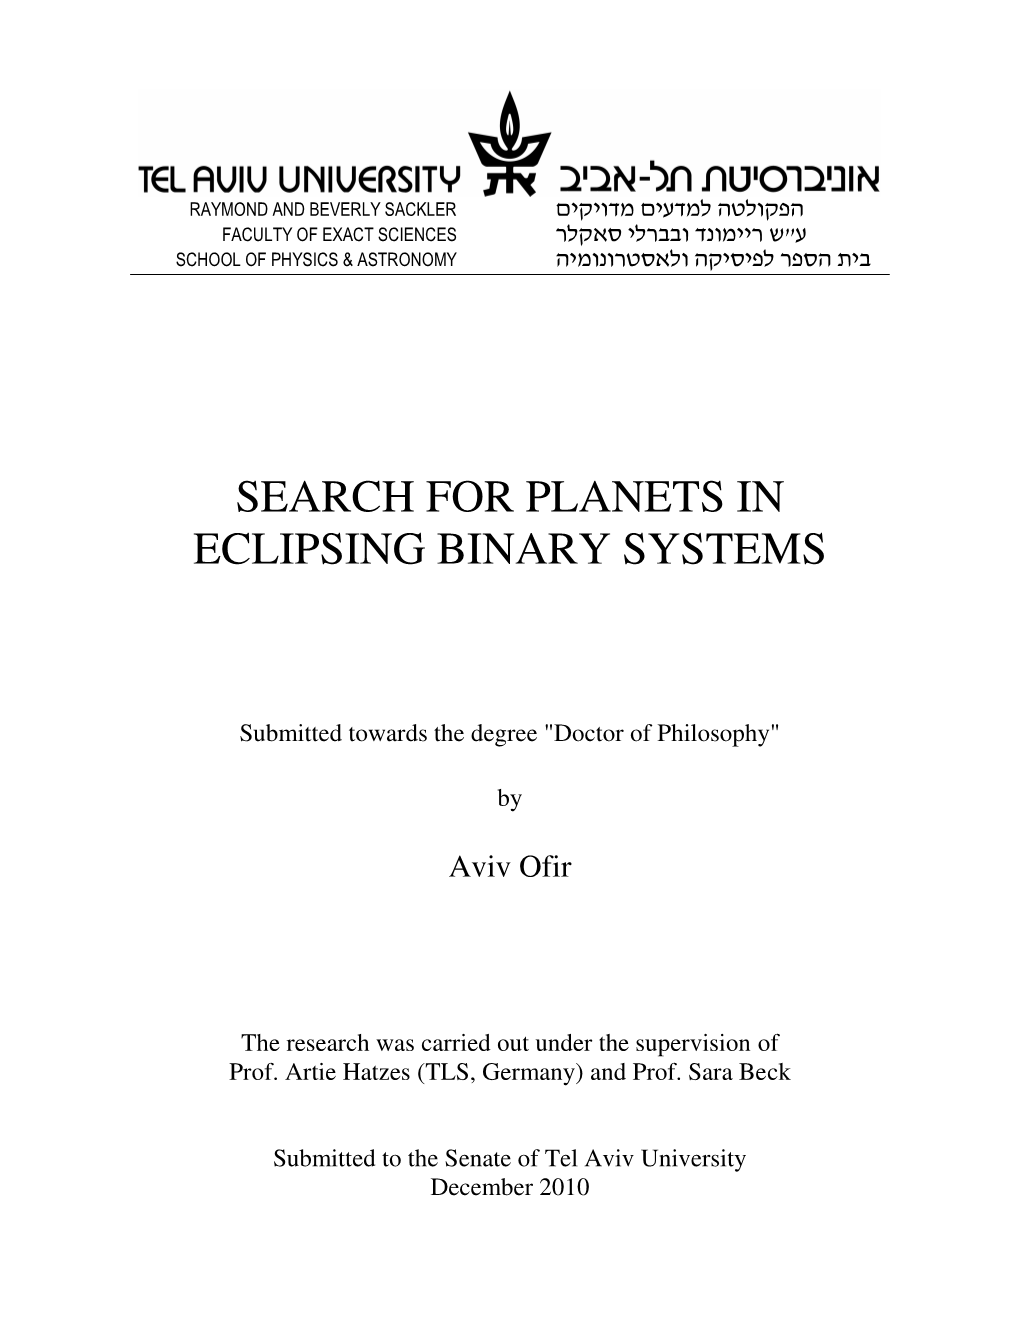 Search for Planets in Eclipsing Binary Systems